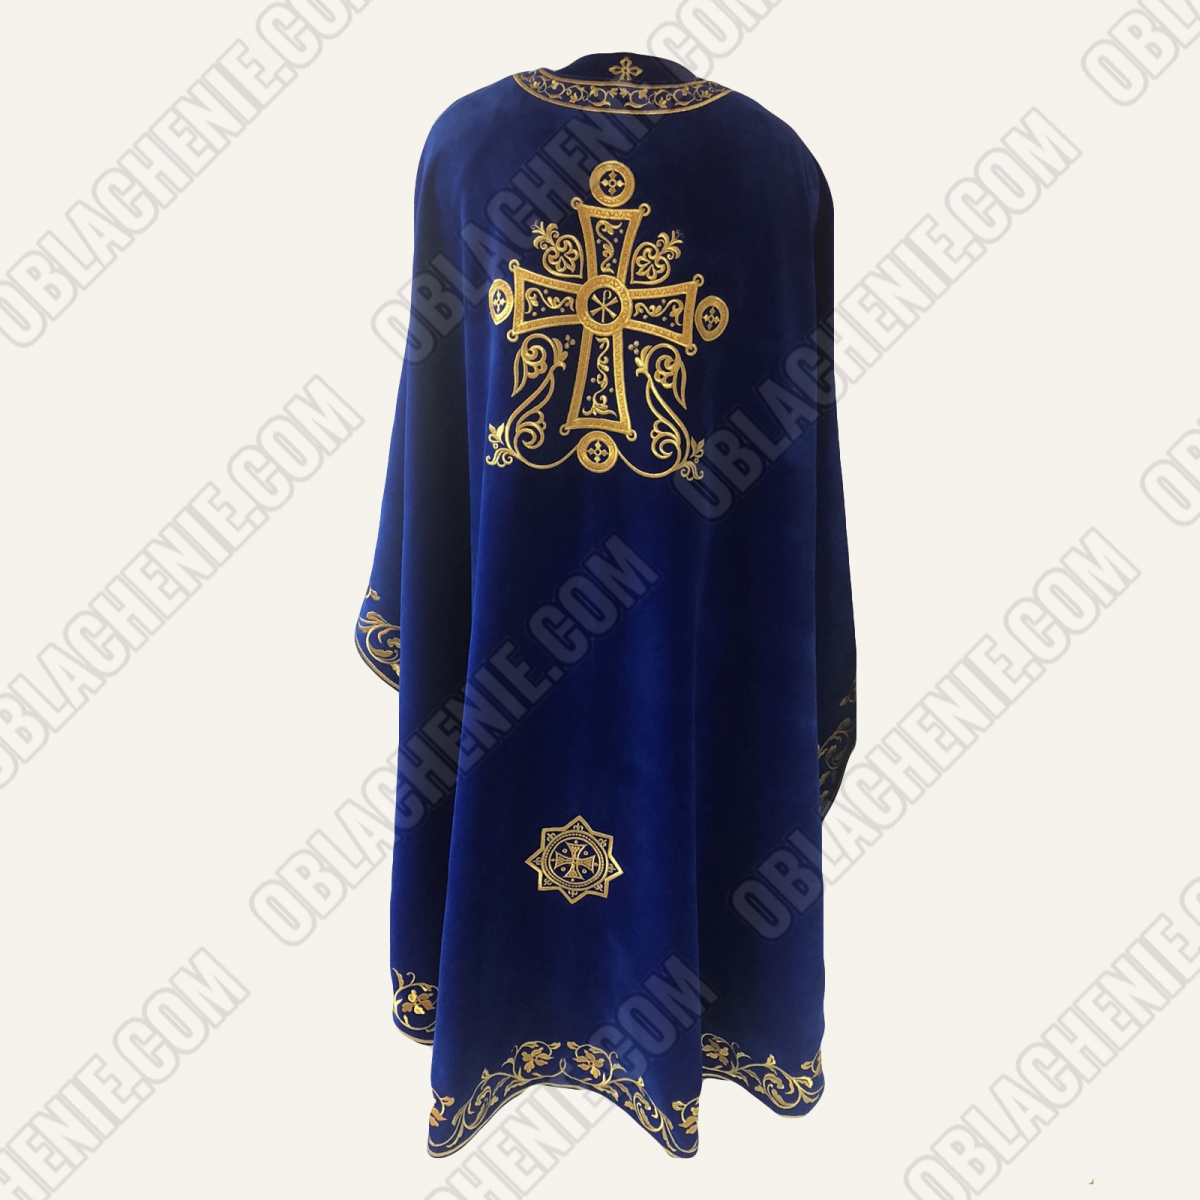 EMBROIDERED PRIEST'S VESTMENTS 11321